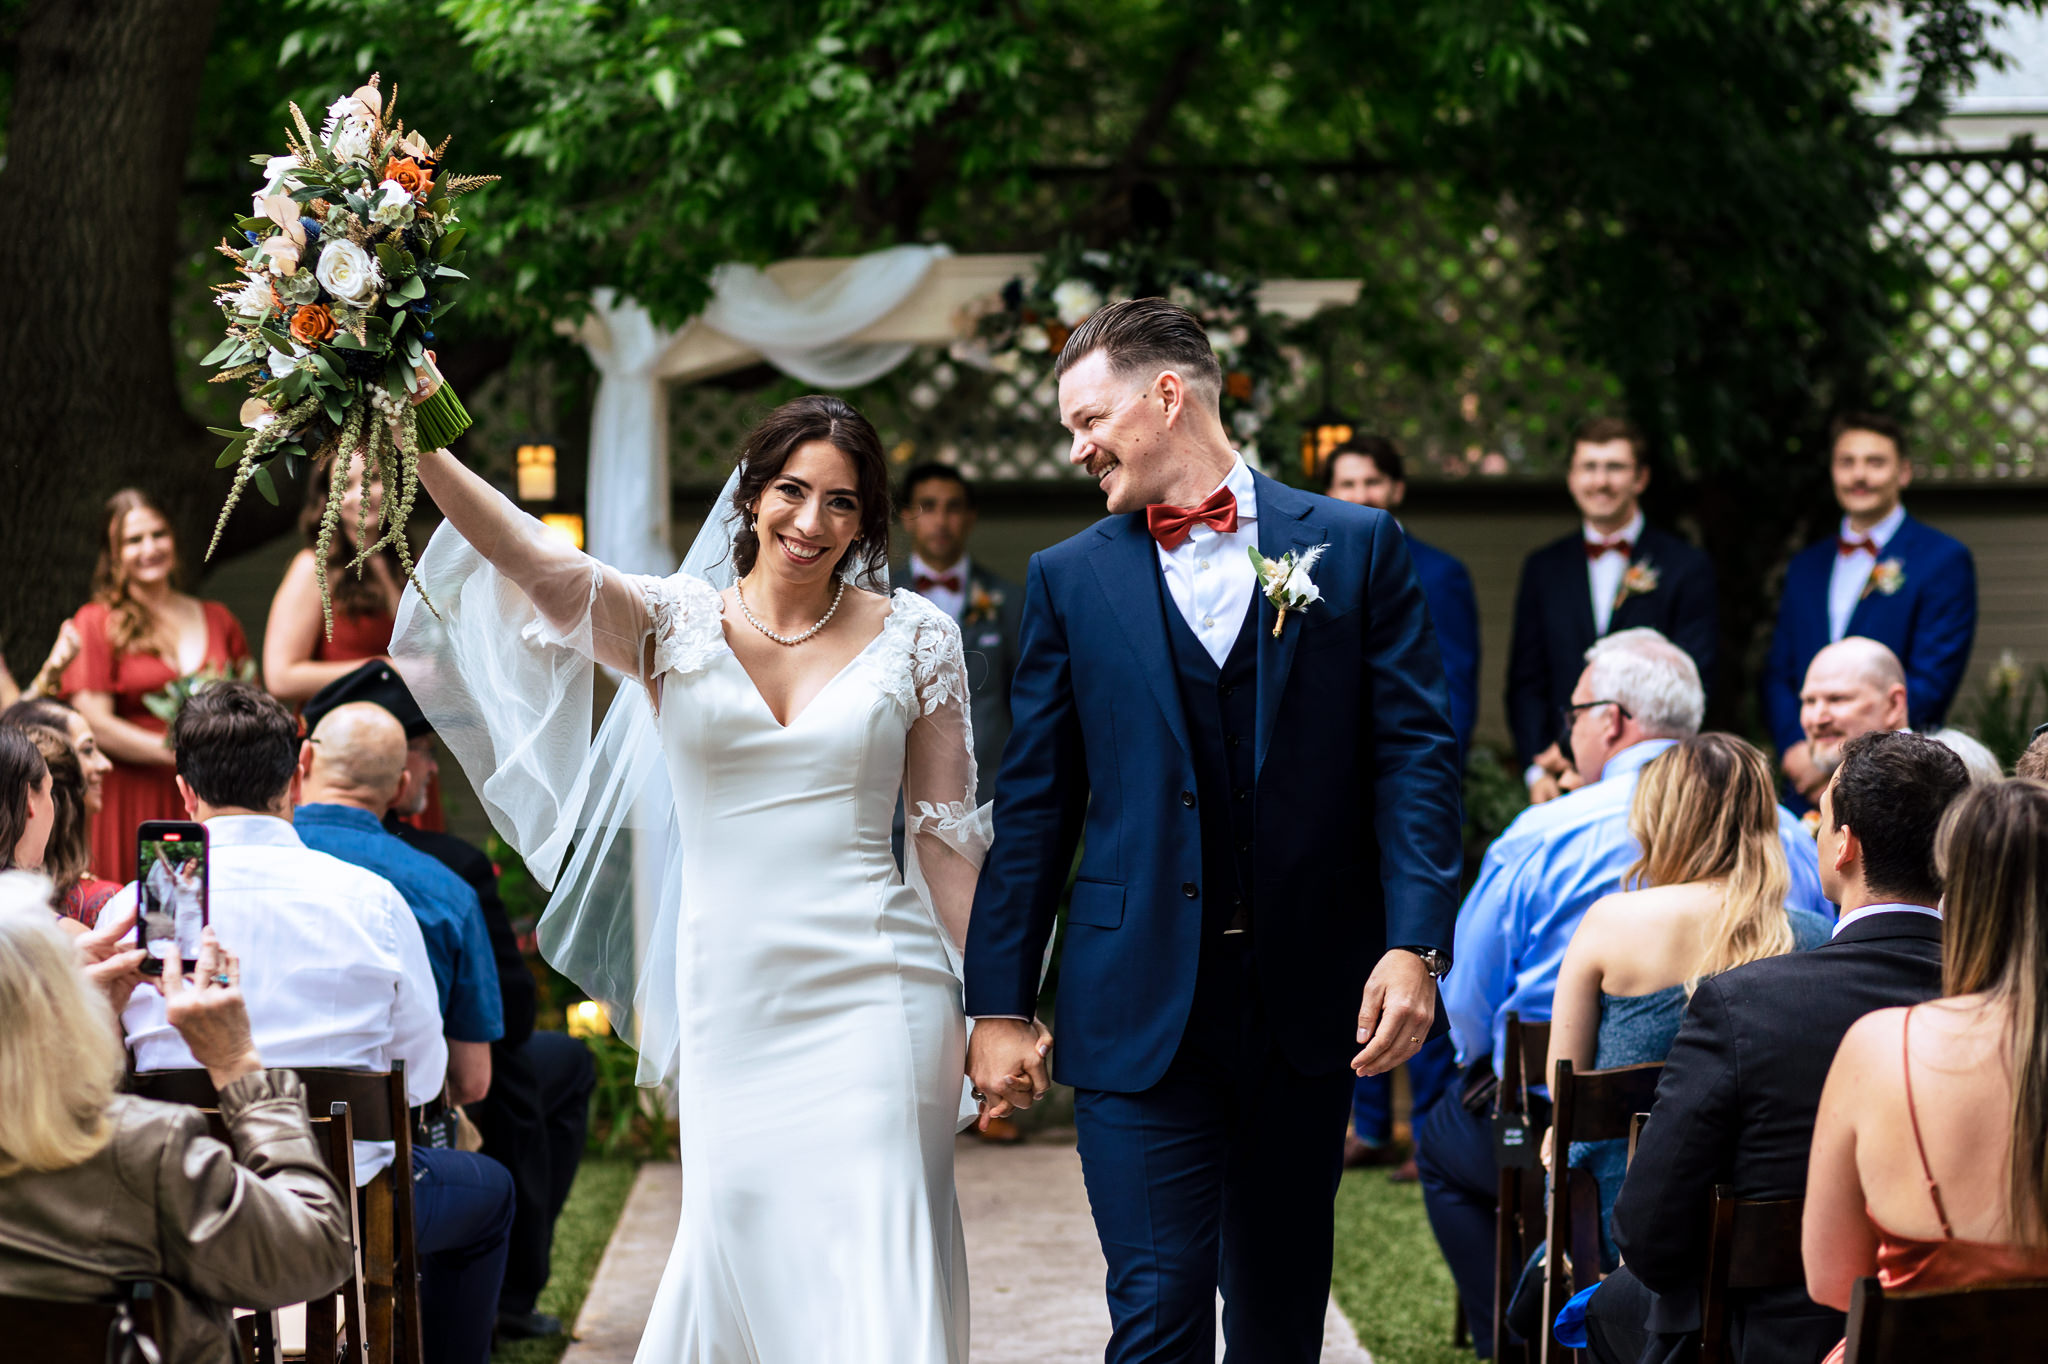 Bride & Groom walking back up the aisle after their wedding ceremony for Haley & Gytenis' Summer Wedding at The McCreery House by Colorado Wedding Photographer, Jennifer Garza.